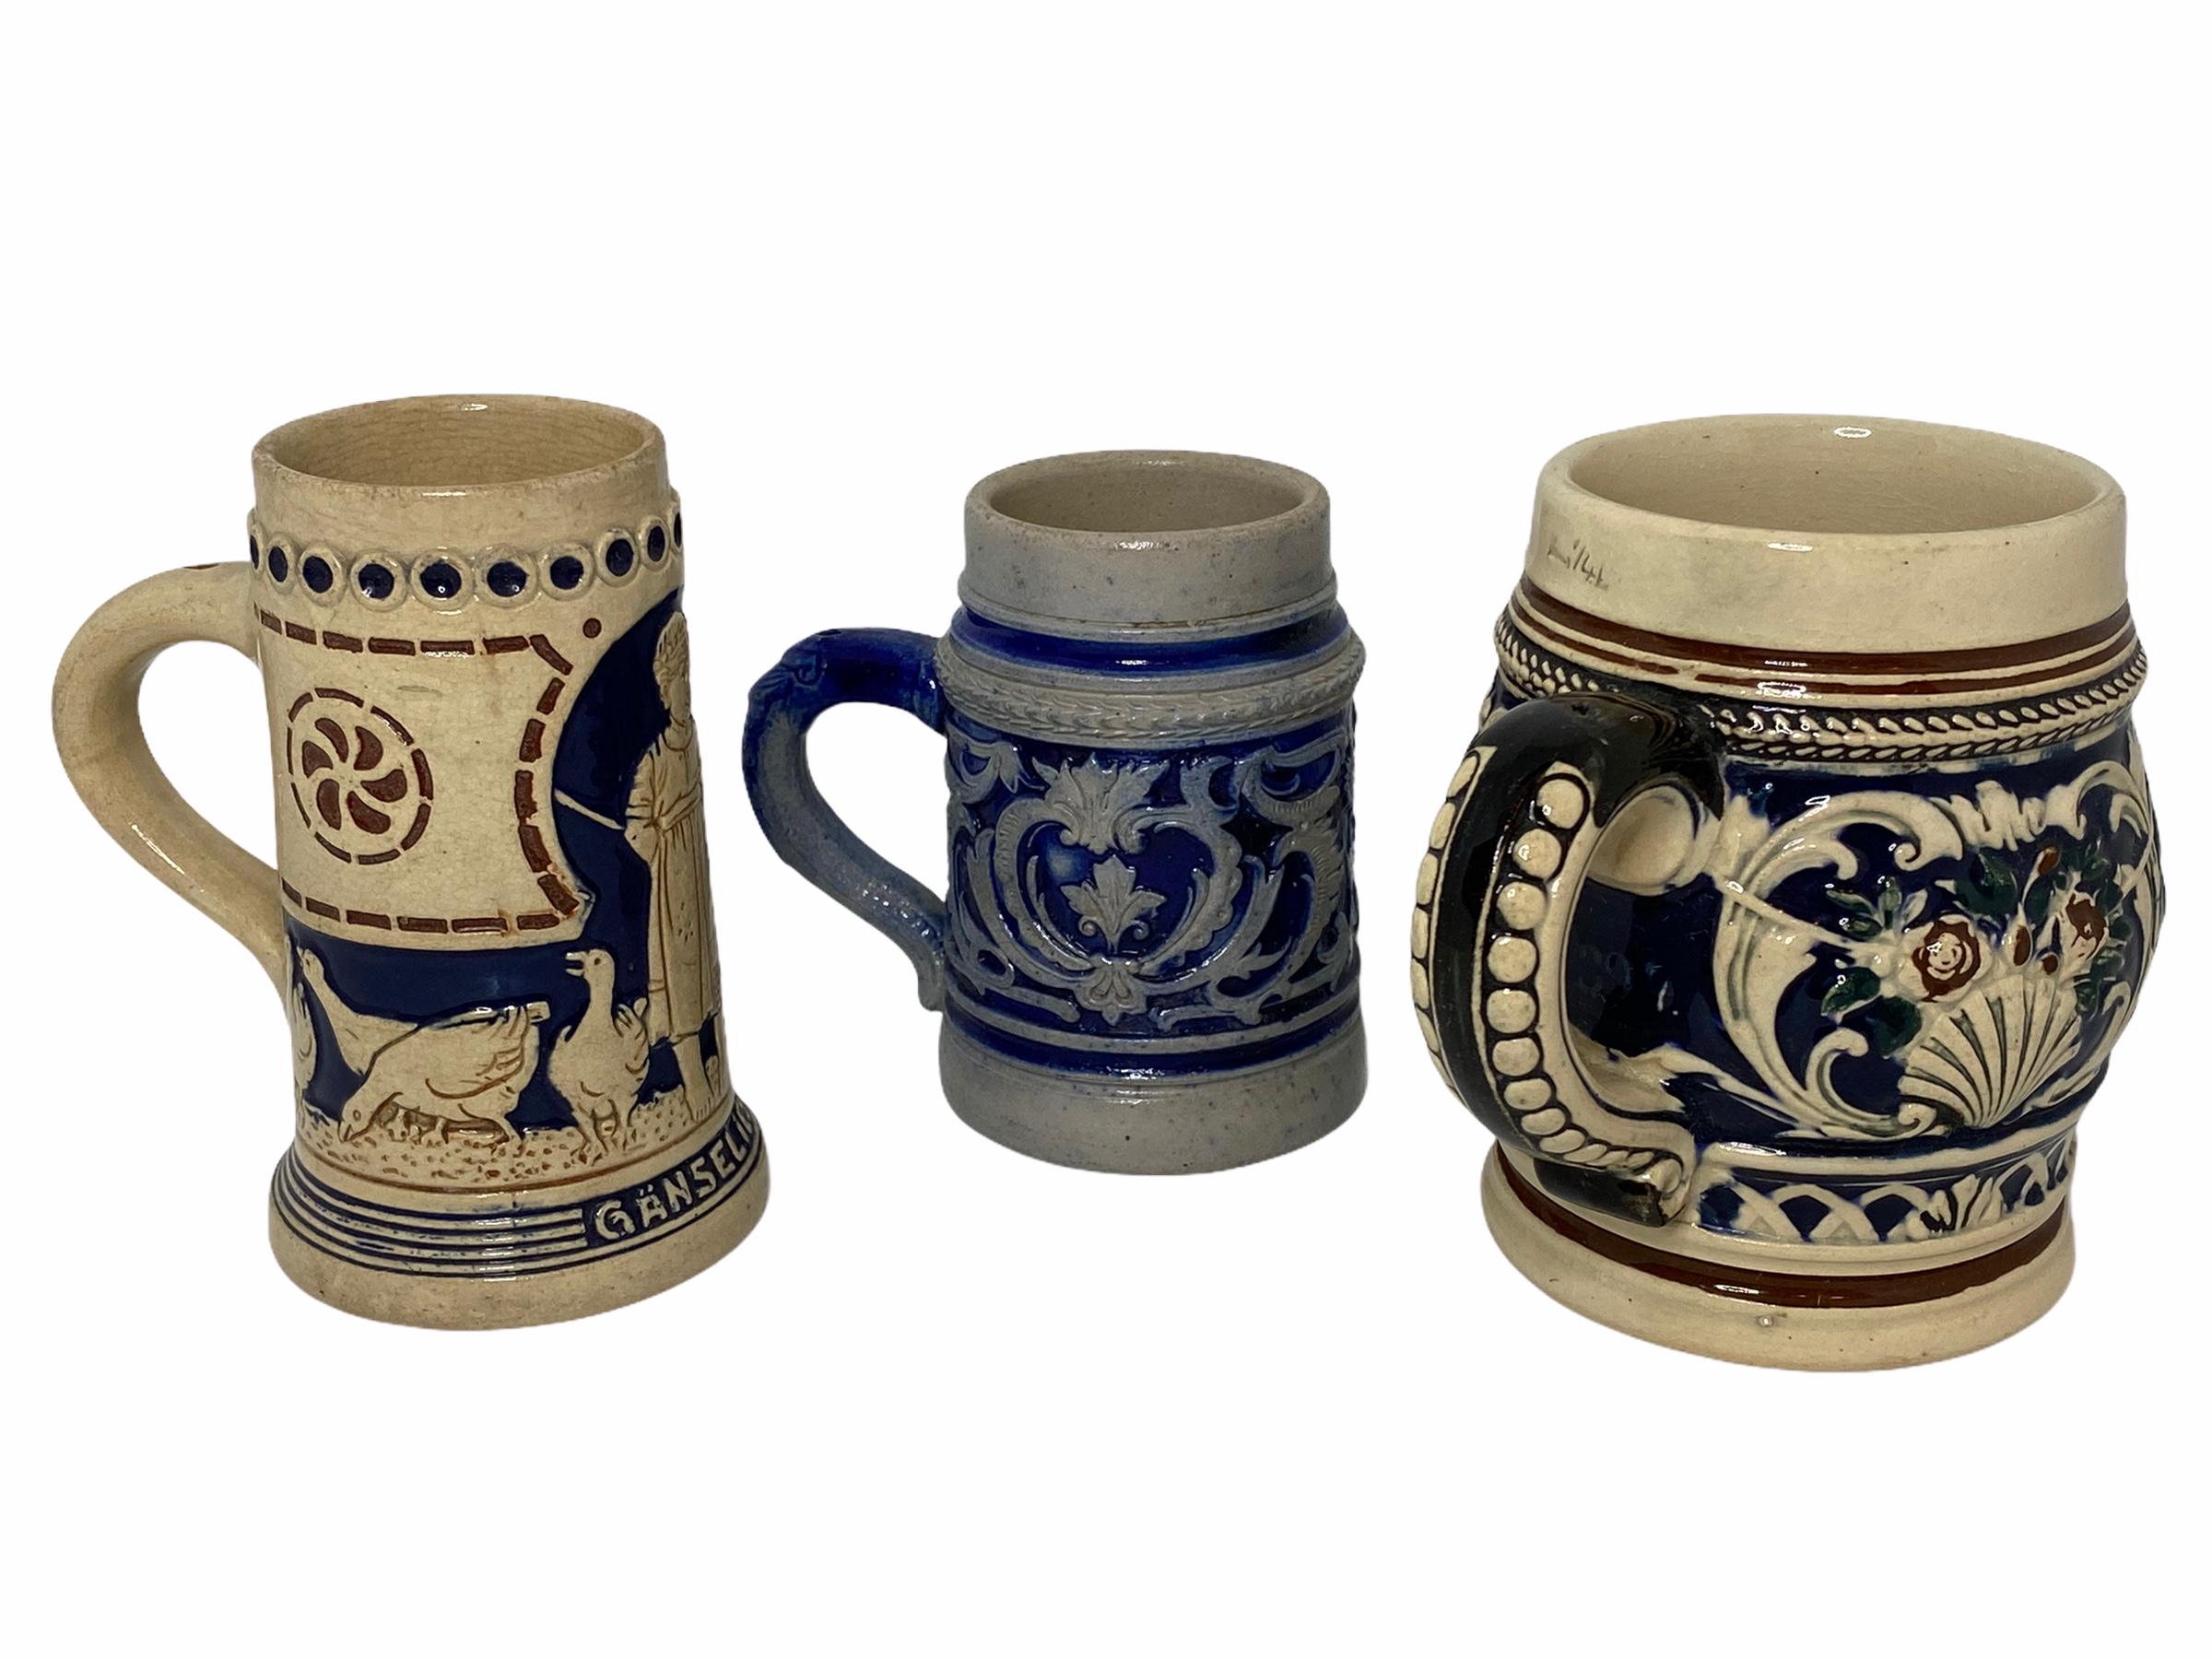 A lot of three german beer steins. Each made in Germany circa 1900s or older. Absolutely gorgeous pieces still in great condition, without damage. One is a 1/4 Liter Stein and two of them are approx. for 1/8 Liter. The one with the Goose Maid is